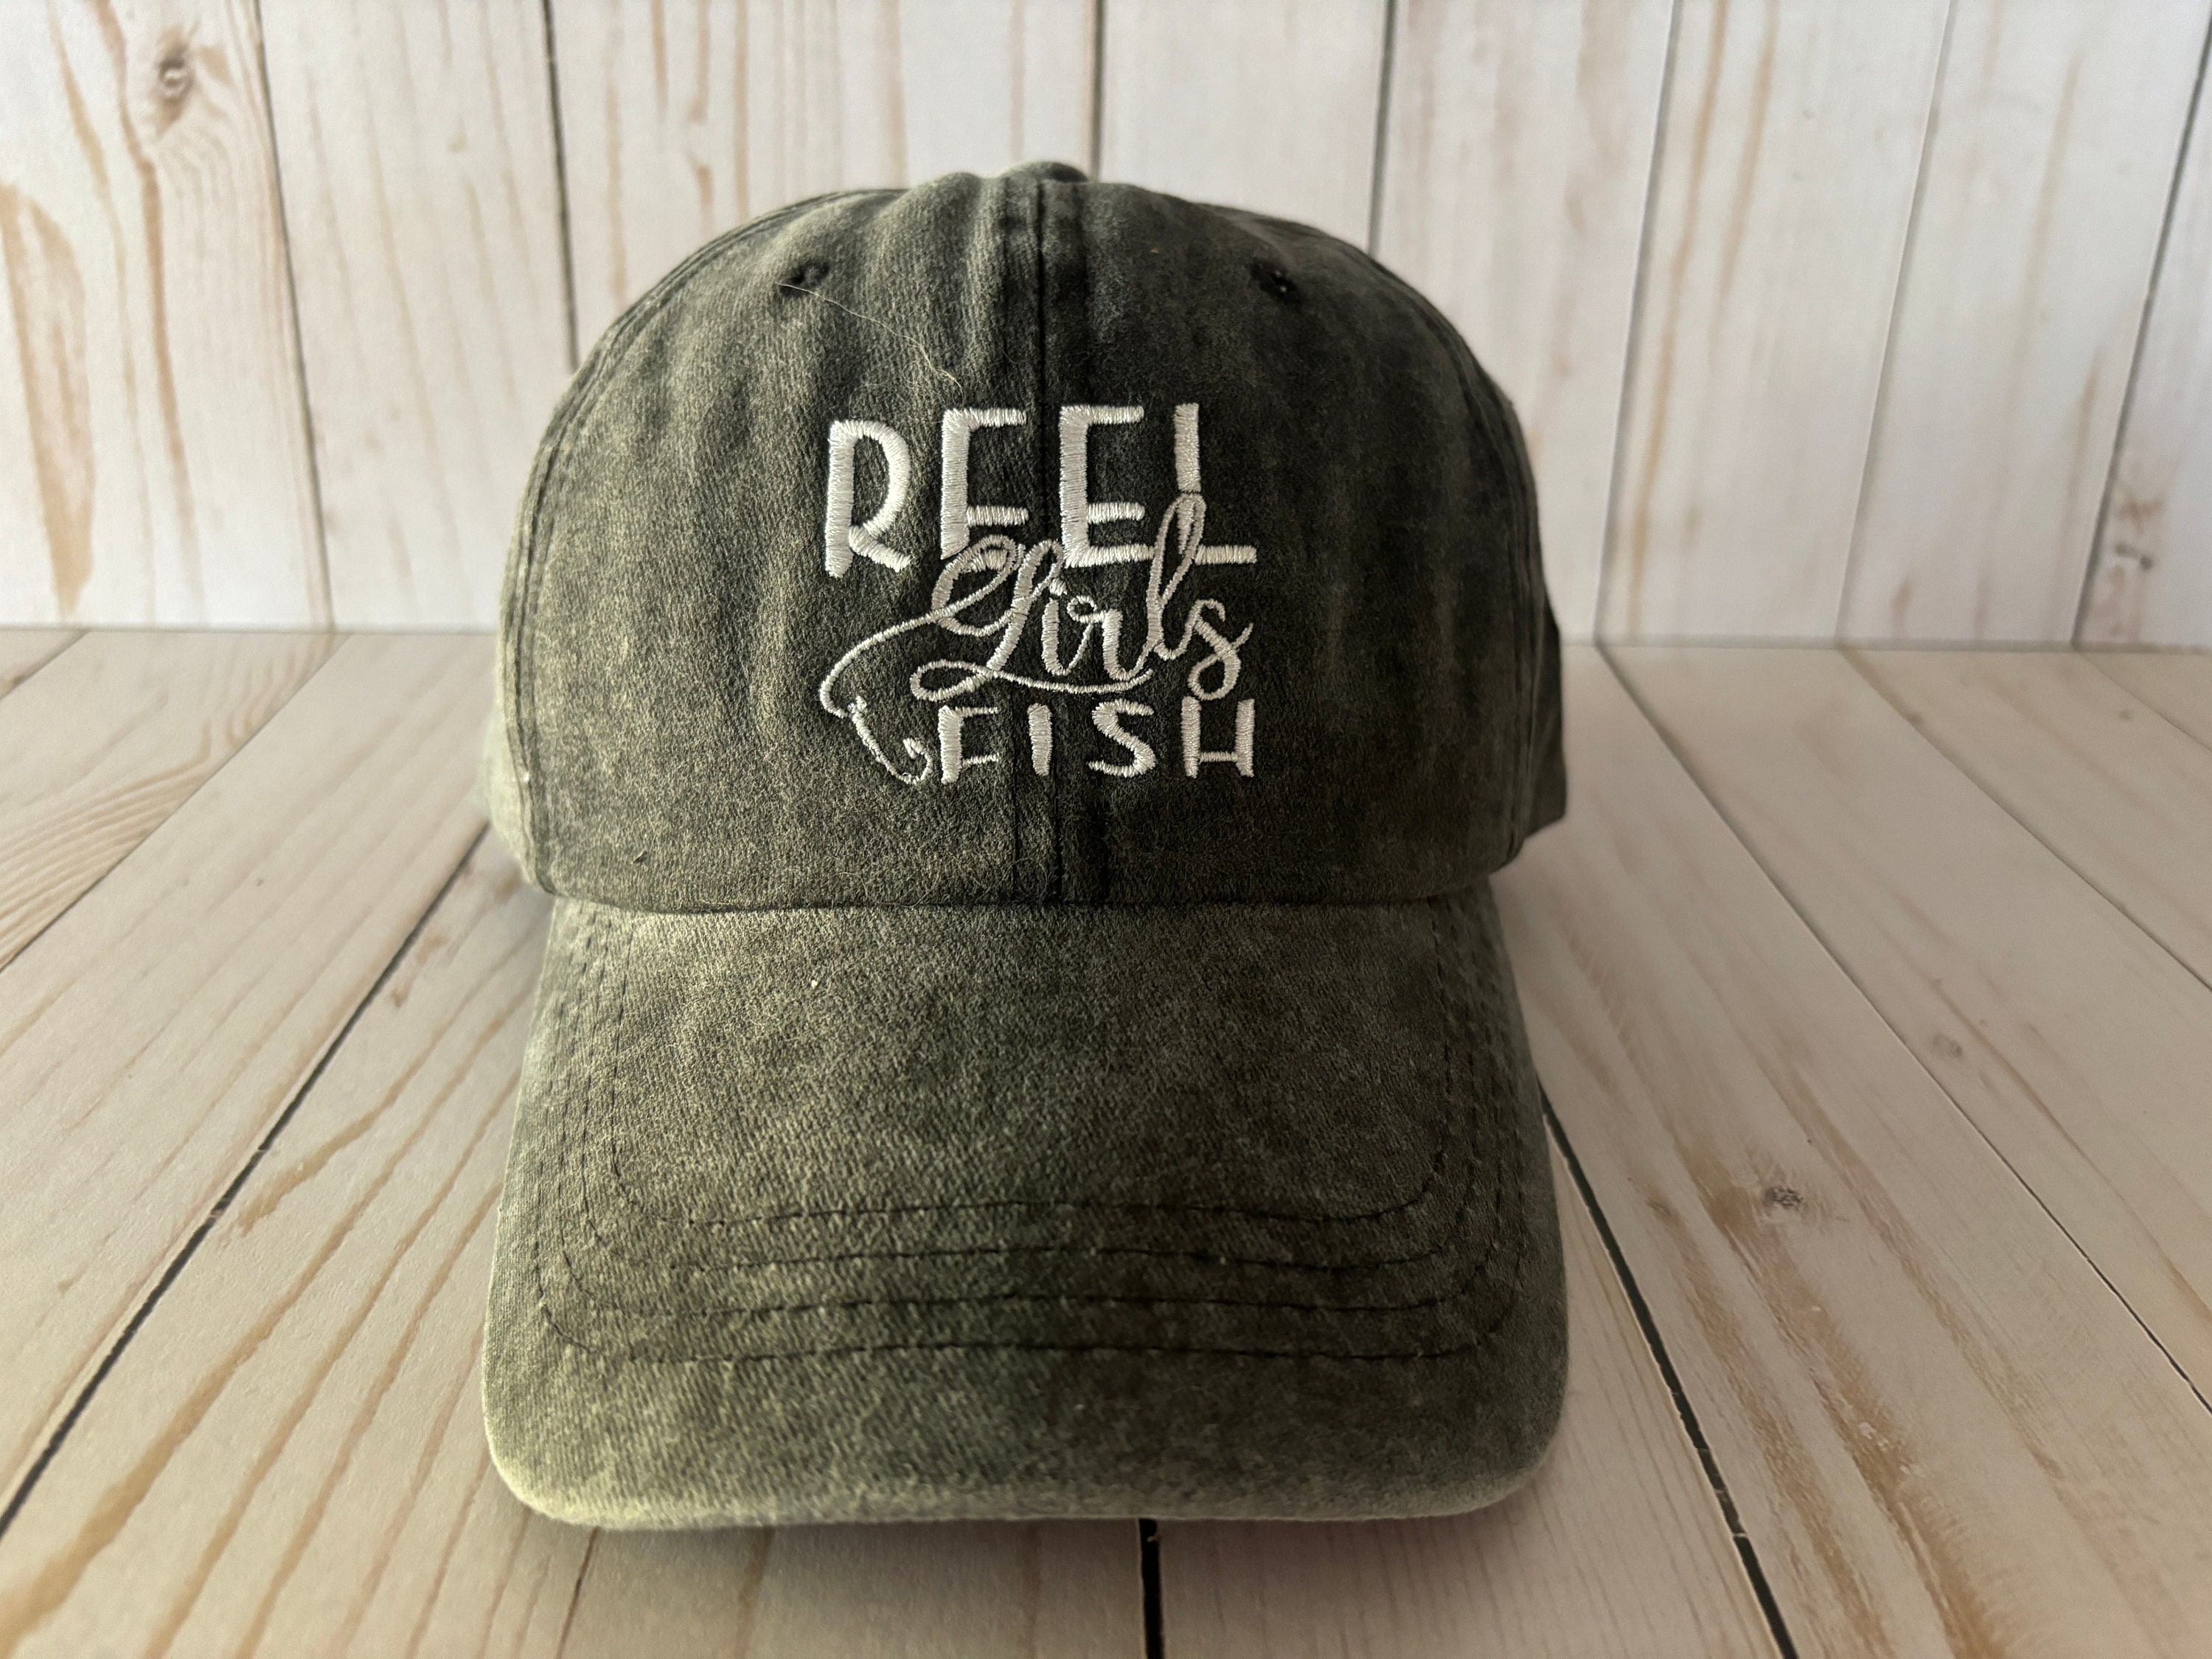 Reel Women Fish - Funny Fishing Quote  Cap for Sale by webstar2992